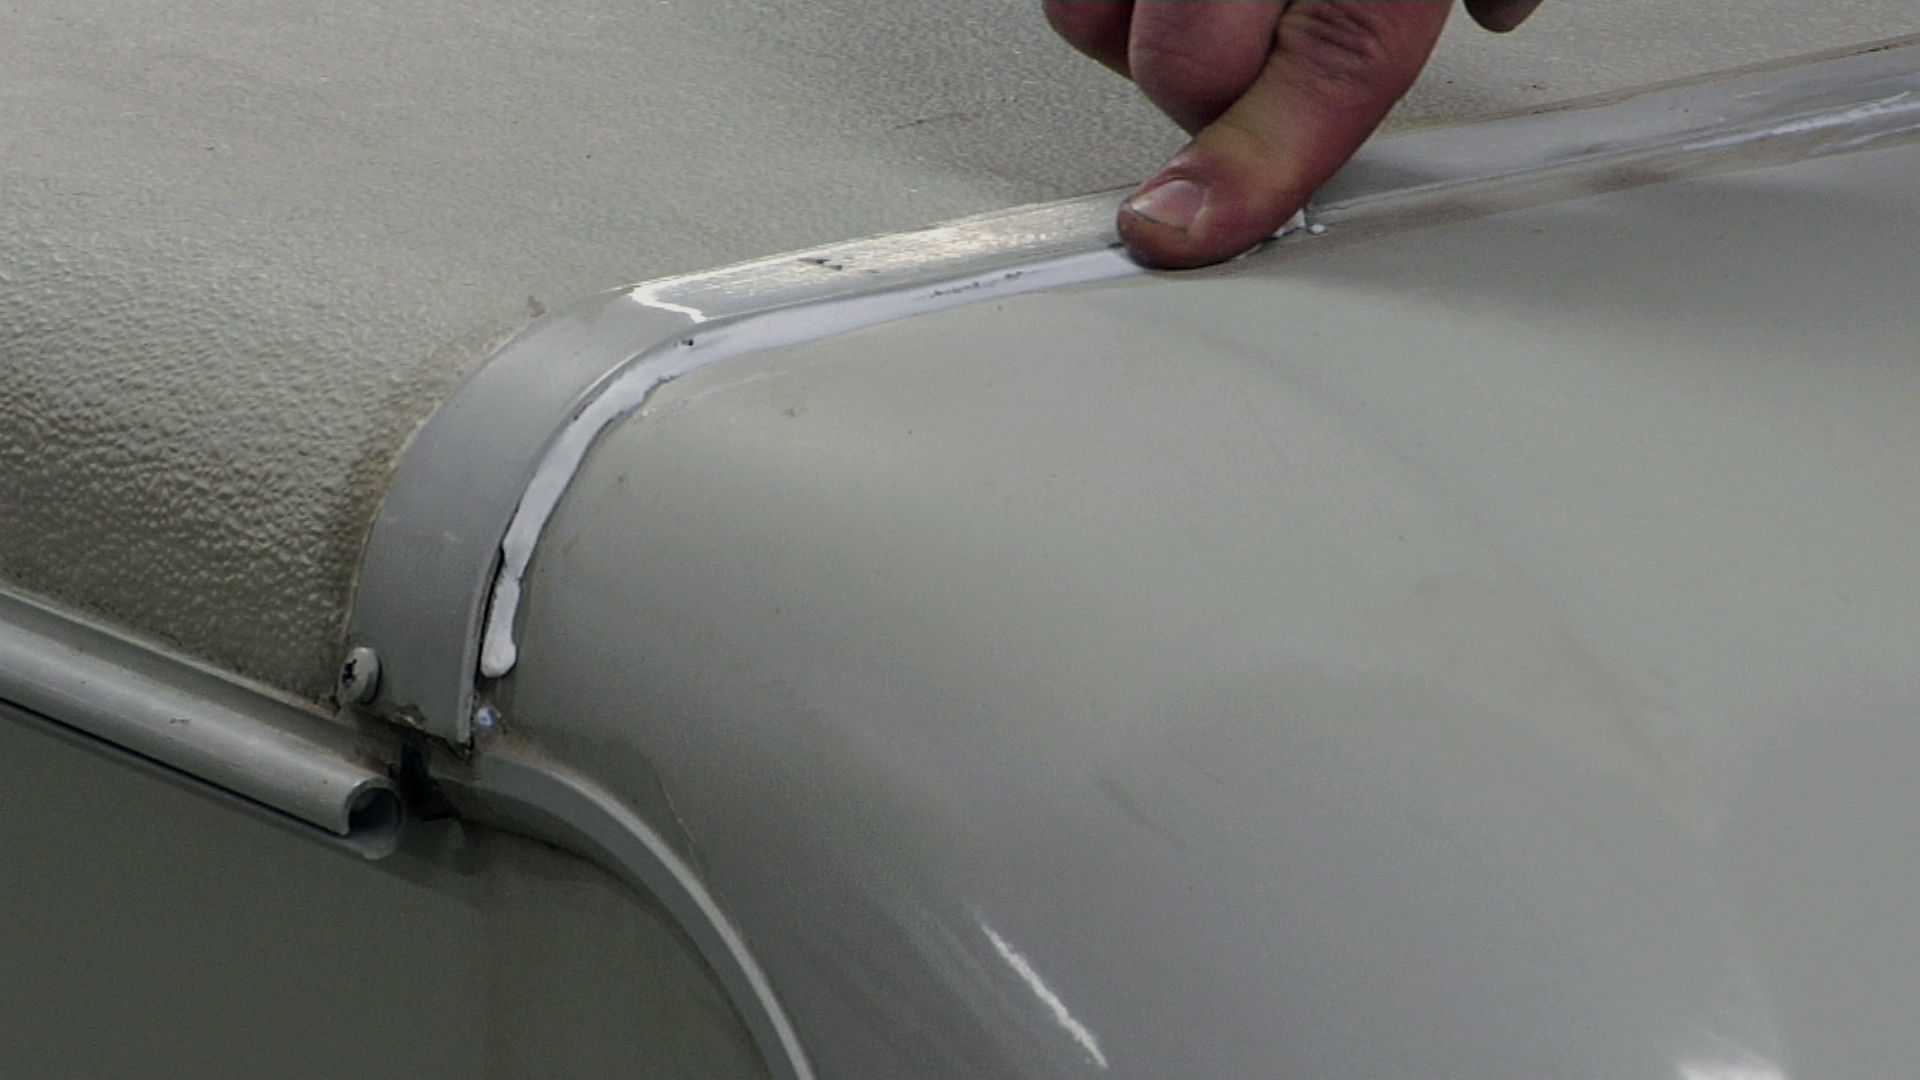 RV Roof Repair: Seal a Front Cap with Outdoor Silicone